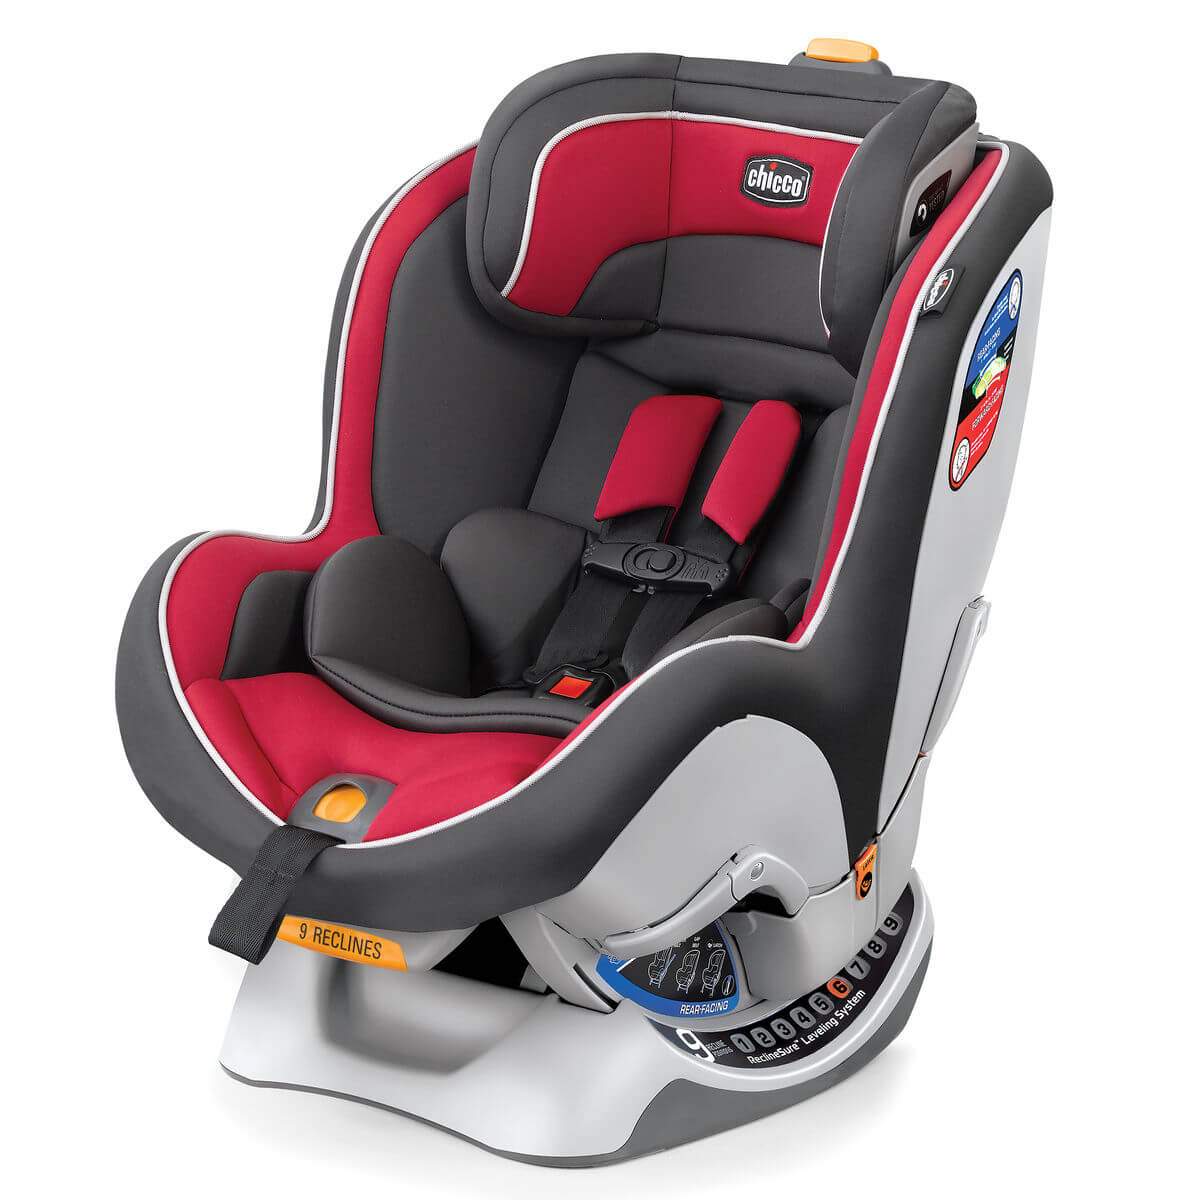 Why Opt for Top Rated Car Seats - Lifehack